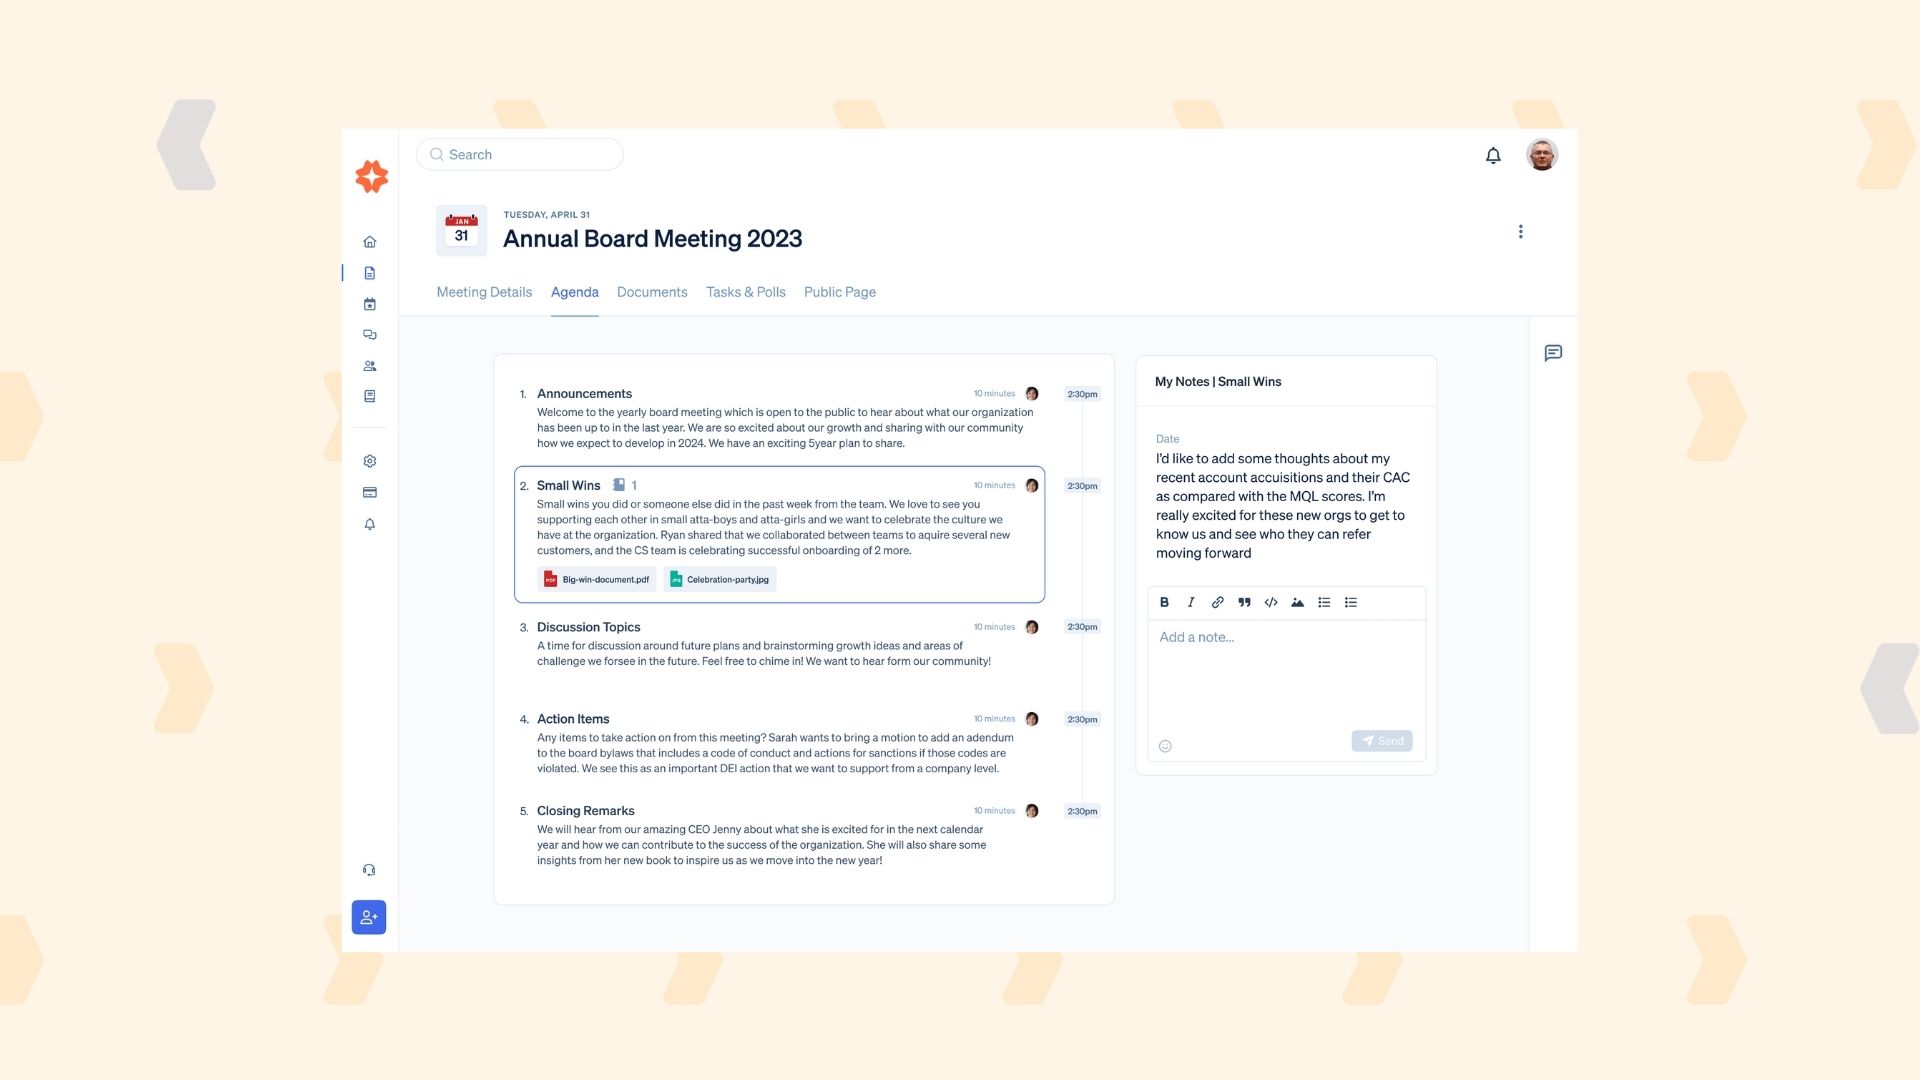 Agenda Builder: Stop recreating your agendas from scratch. We built customizable agenda templates that’ll help you ensure outcome-driven meetings. You can also utilize our Minutes Maker to record in-depth minutes directly from the agenda.